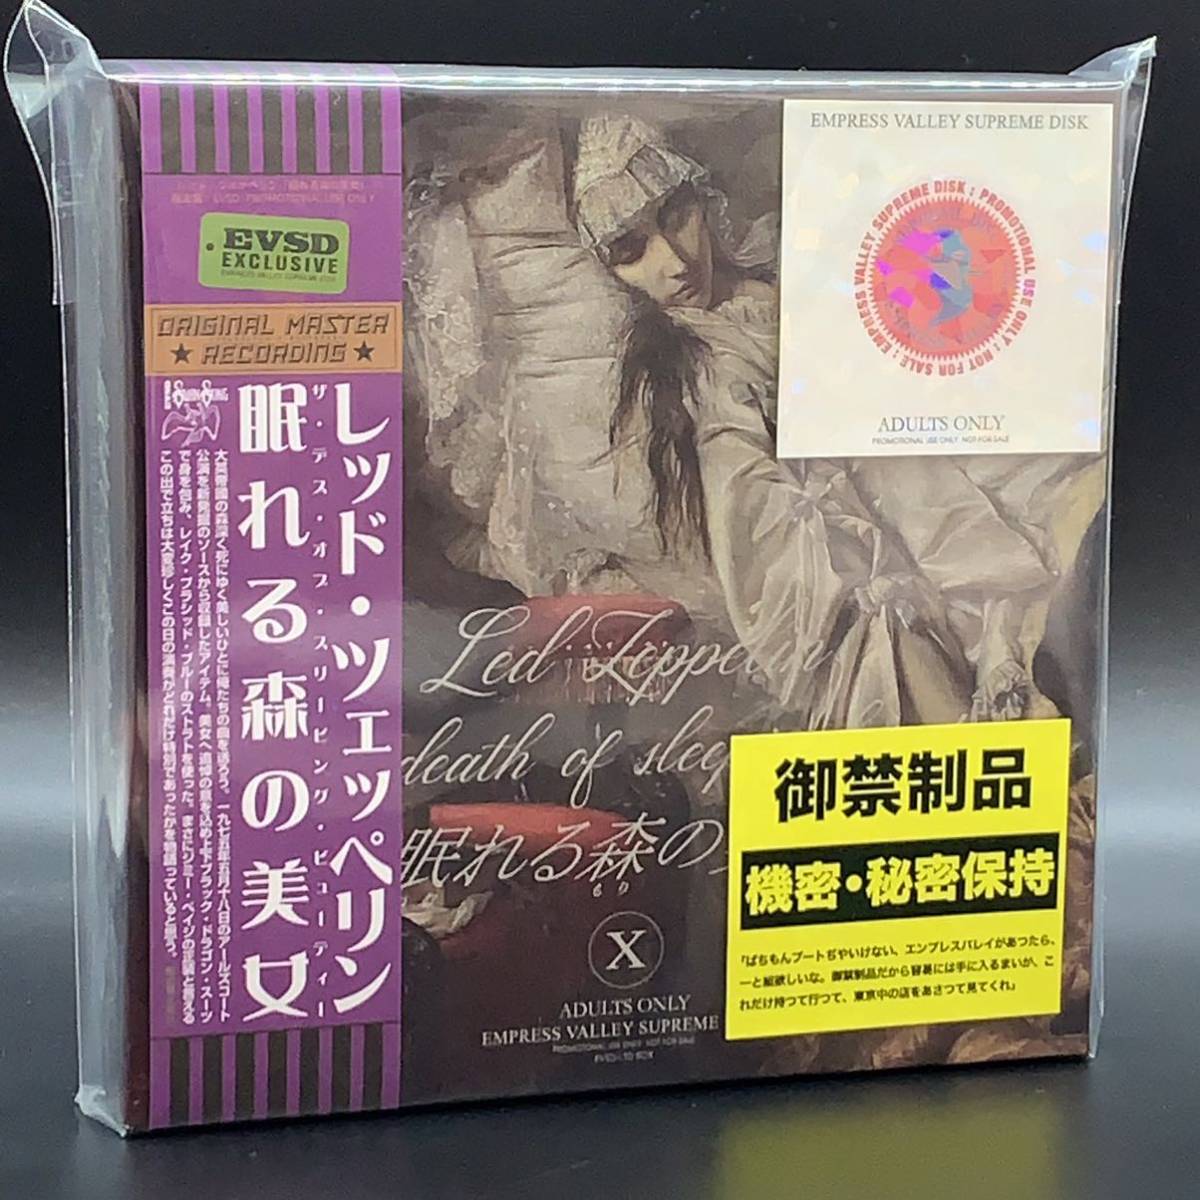 LED ZEPPELIN / THE DEATH OF SLEEPING BEAUTY「眠れる森の美女」(6CD BOX) export cover box